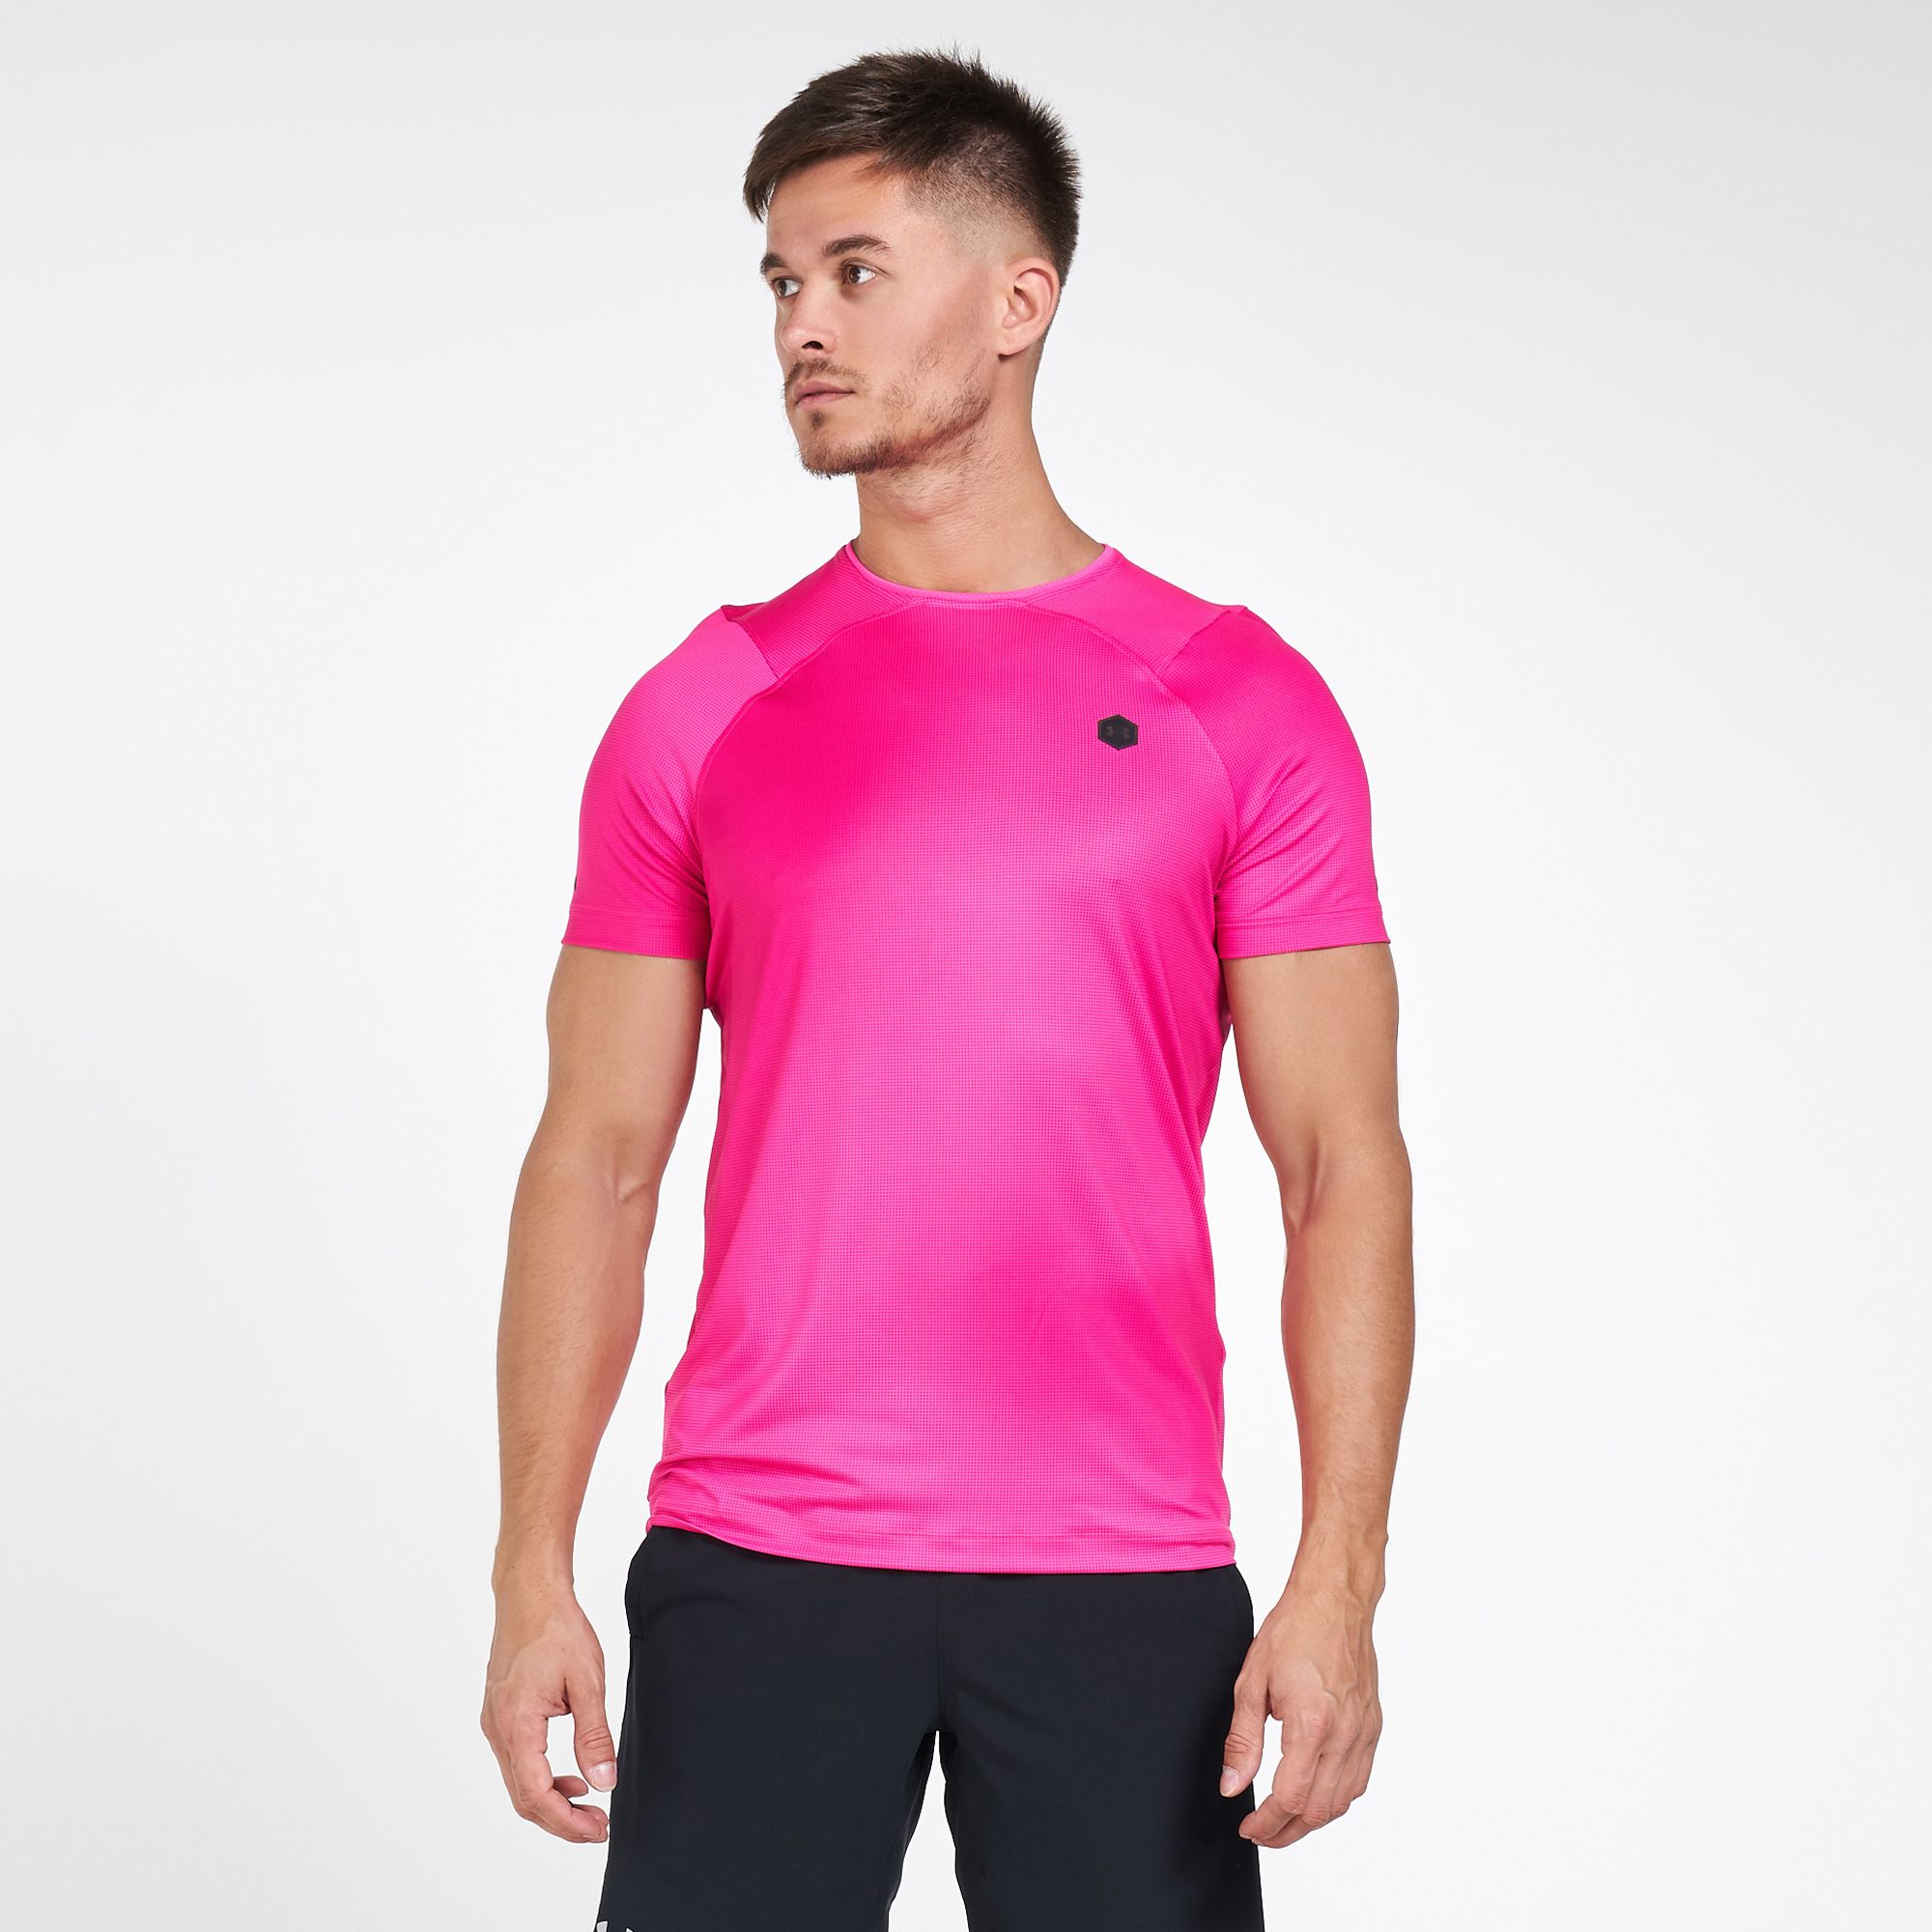 men's under armour fitted shirts